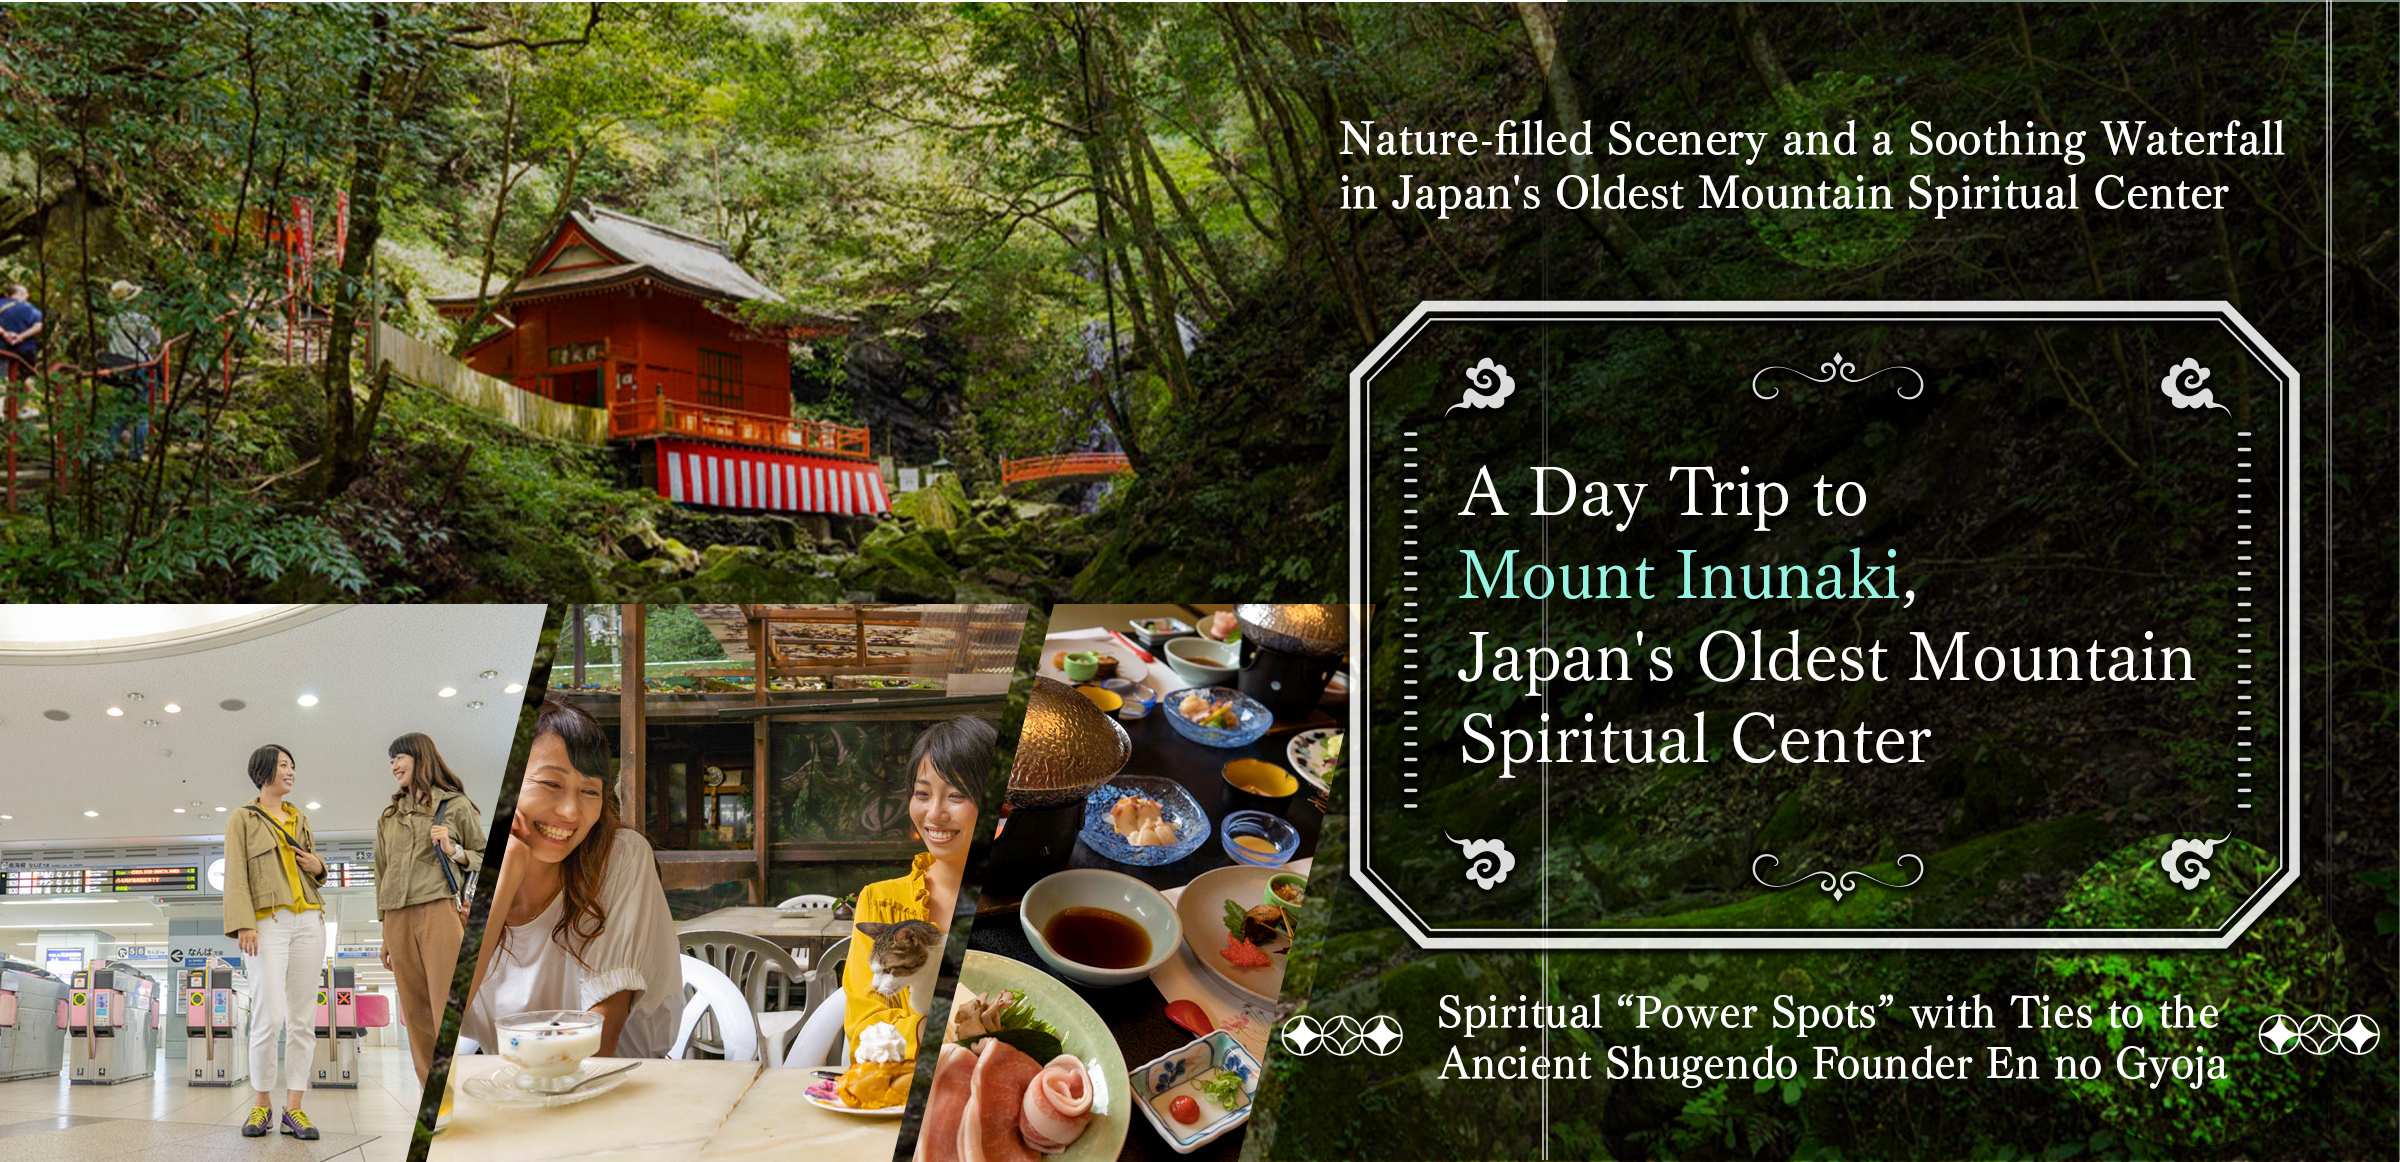 Day Trip to Mount Inunaki: Nature-filled Scenery and a Soothing Waterfall in Japan's Oldest Mountain Spiritual Center